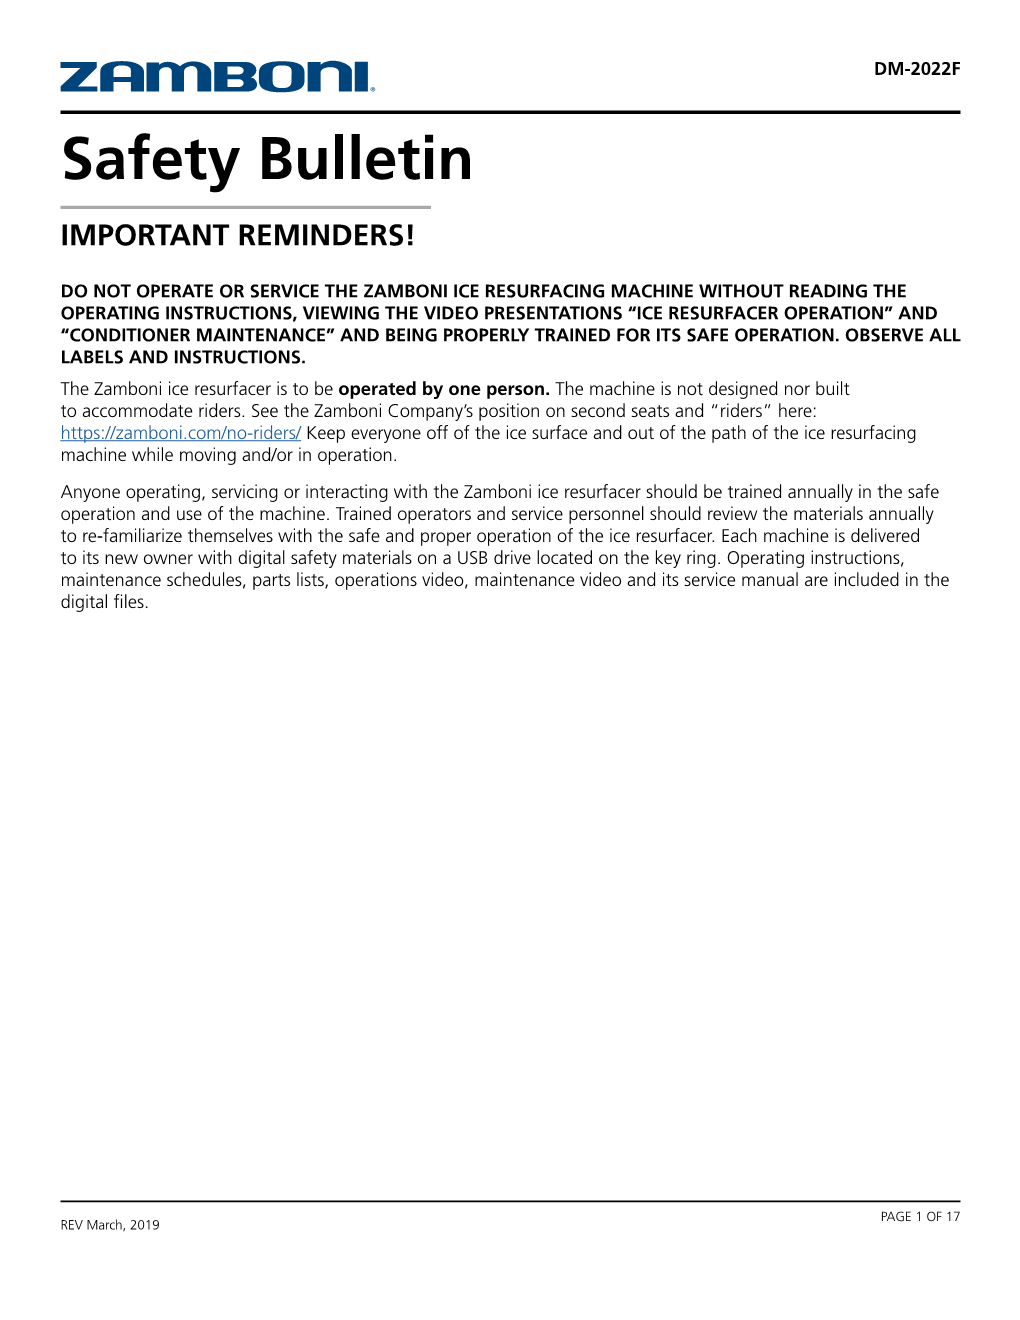 Safety Bulletin IMPORTANT REMINDERS!